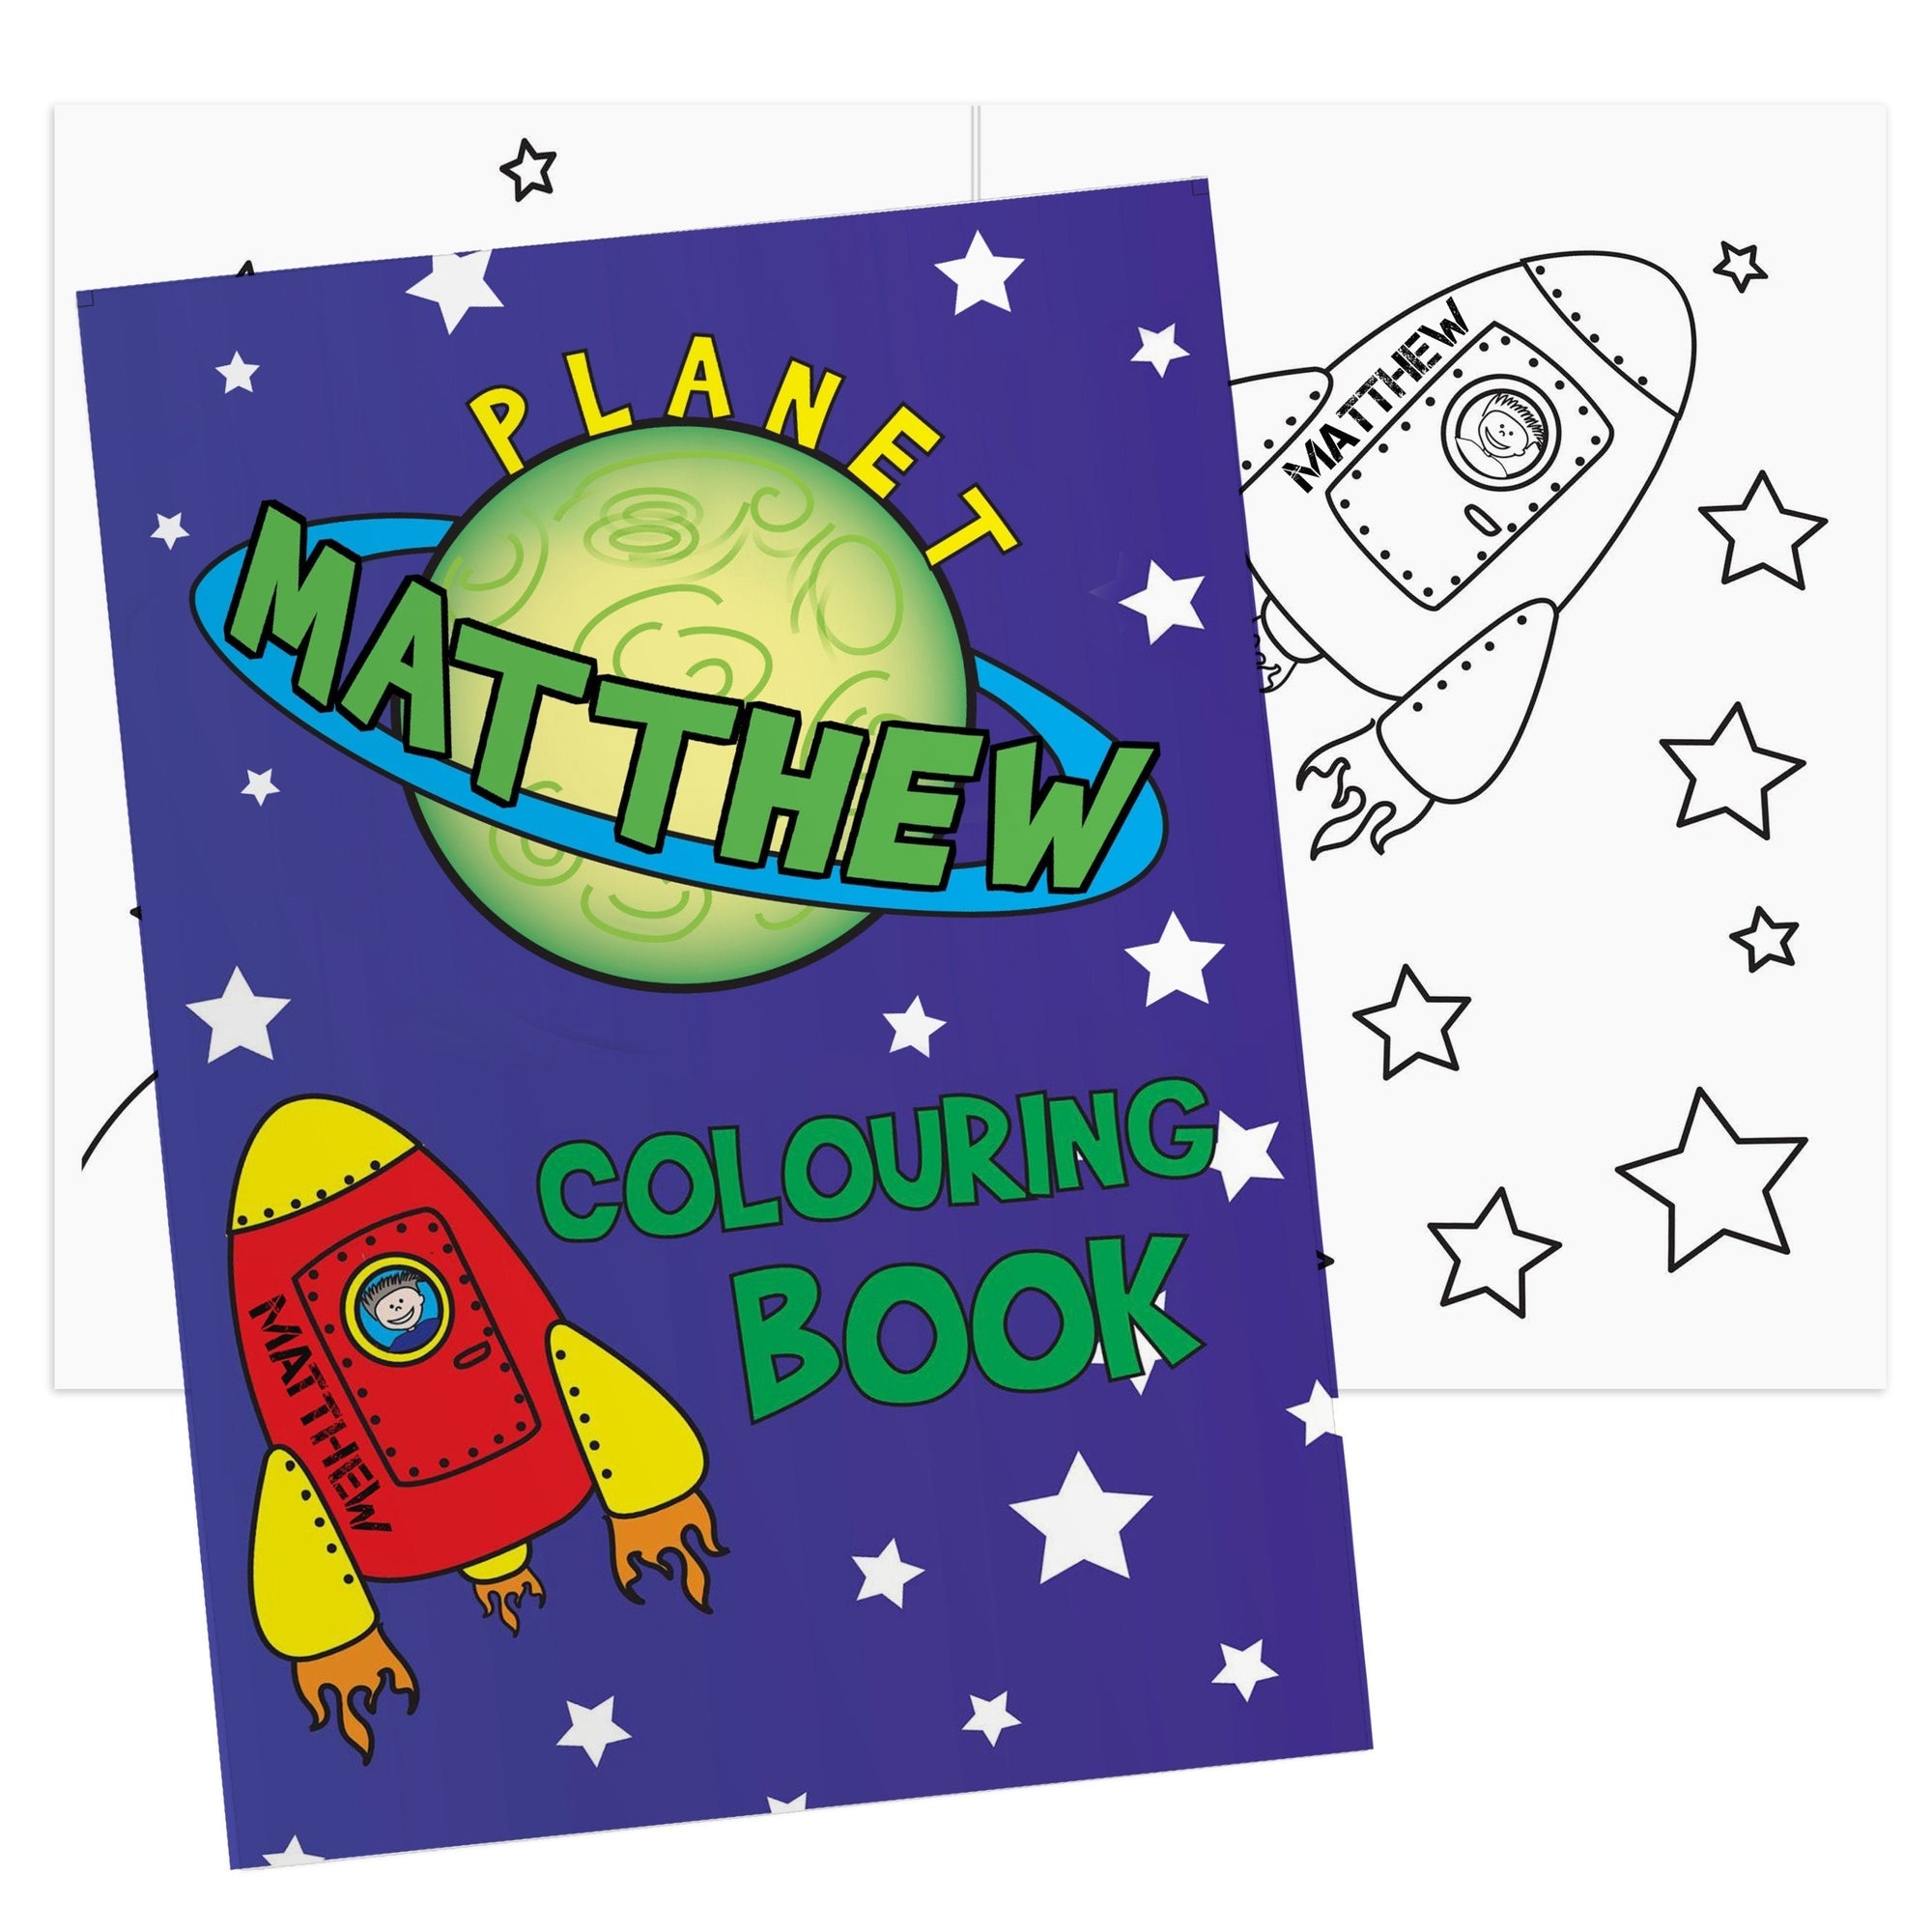 Personalised Space Colouring Book